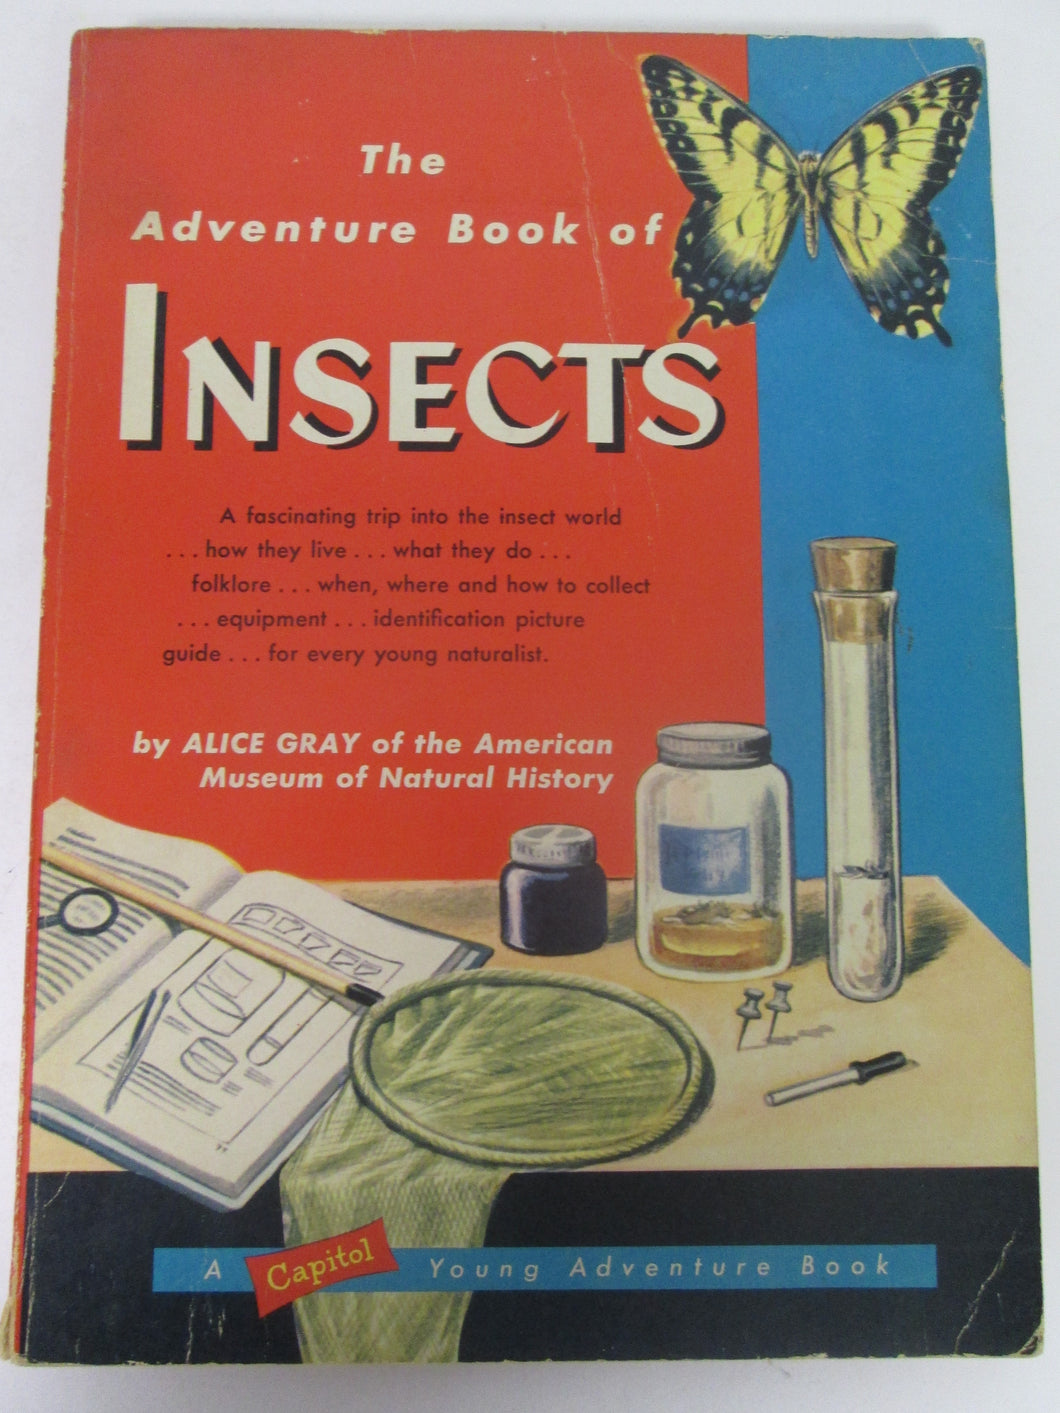 The Adventure Book of Insects by Alice Gary of the American Museum of Natural History PB 1956